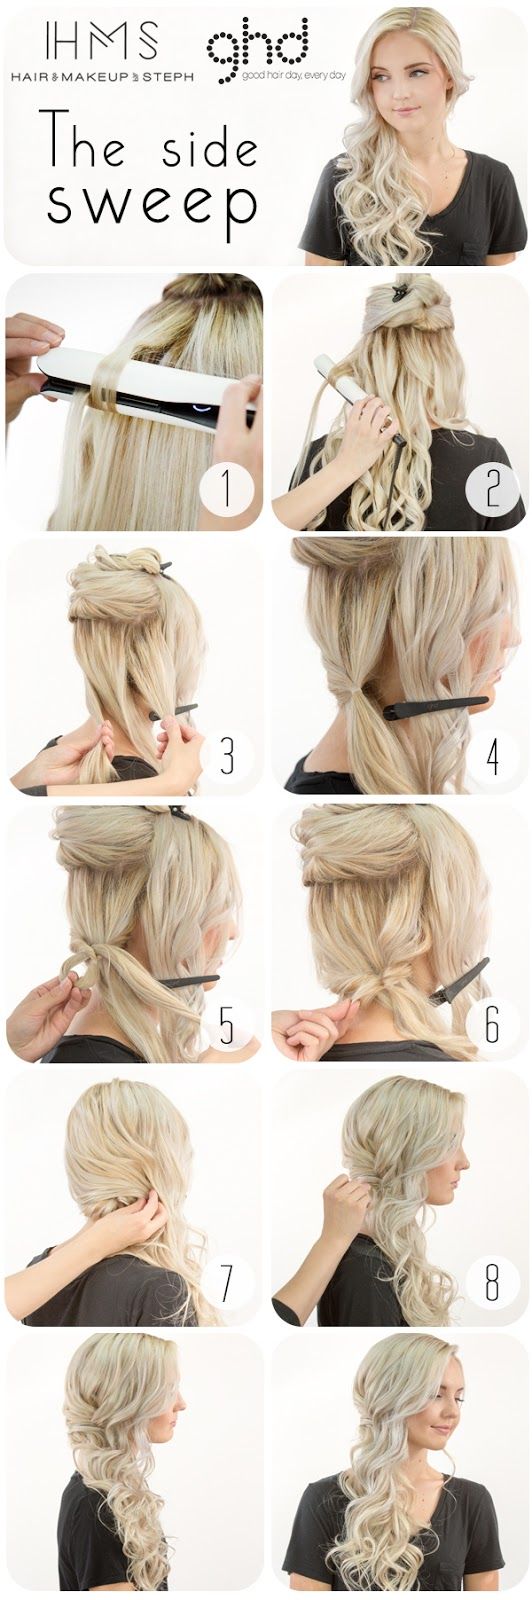 10 Easy And Cute Hair Tutorials For Any Occassion. These hairstyles are great for any occasion whether you just want quick and casual or simple yet elegant. Great for women with medium to long hair. Want no heat waves, a messy sock bun, or stylish braids? Look no further. 